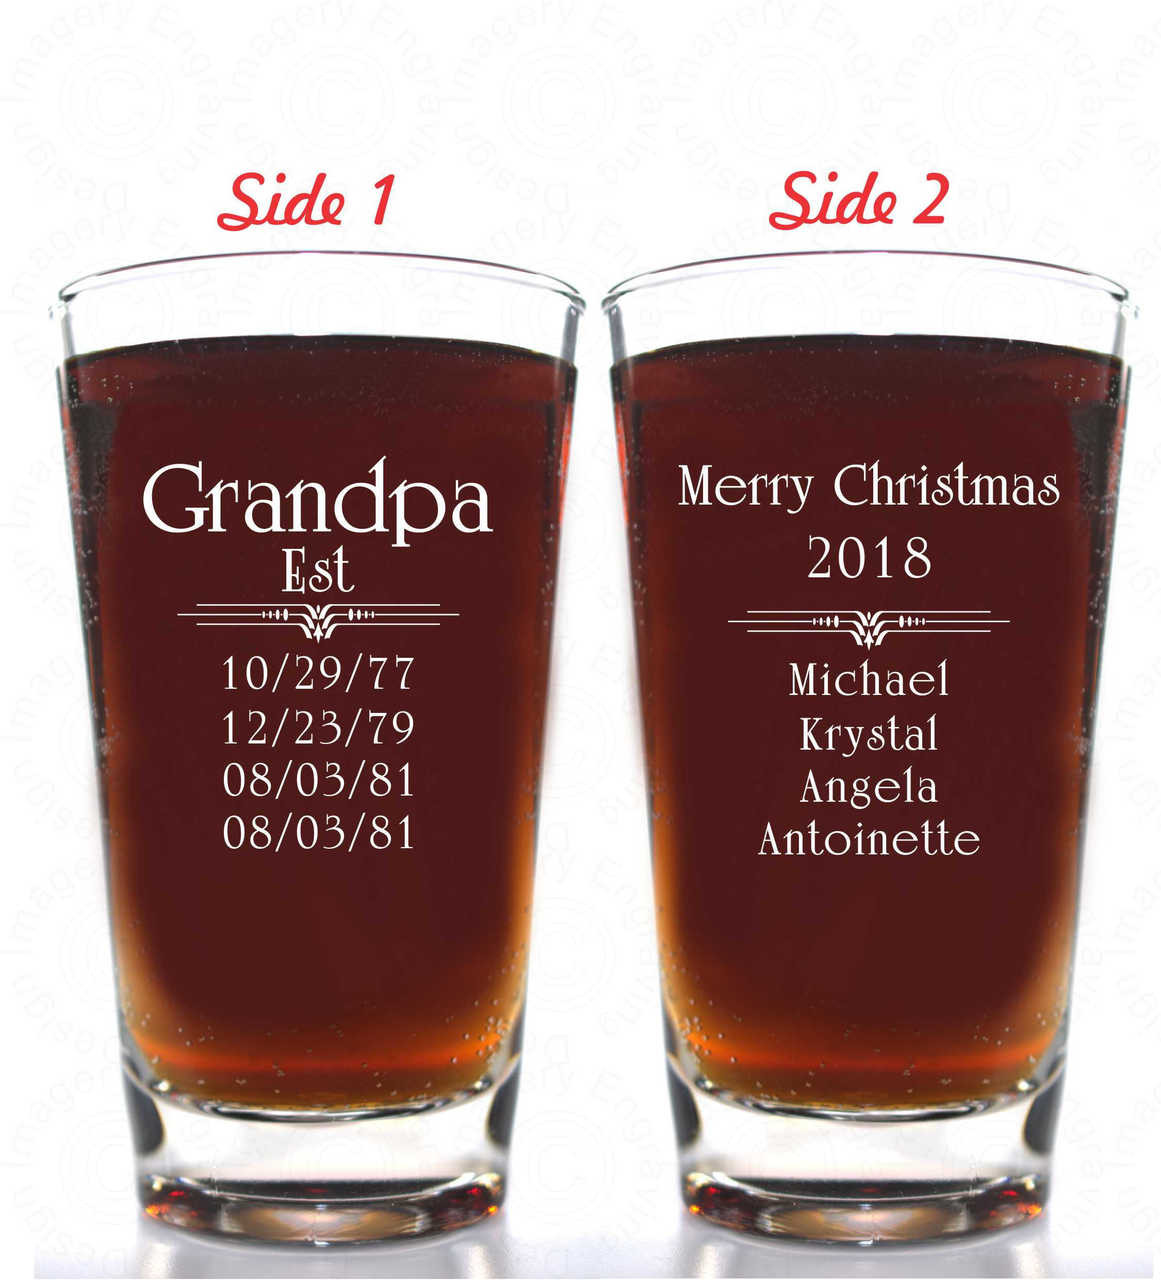 https://cdn11.bigcommerce.com/s-qkcbjh4x/images/stencil/1280x1280/products/344/1597/Dad_Est_Merry_Christmas_Pilsner_2_Sided_2018__31636.1531602620.jpg?c=2